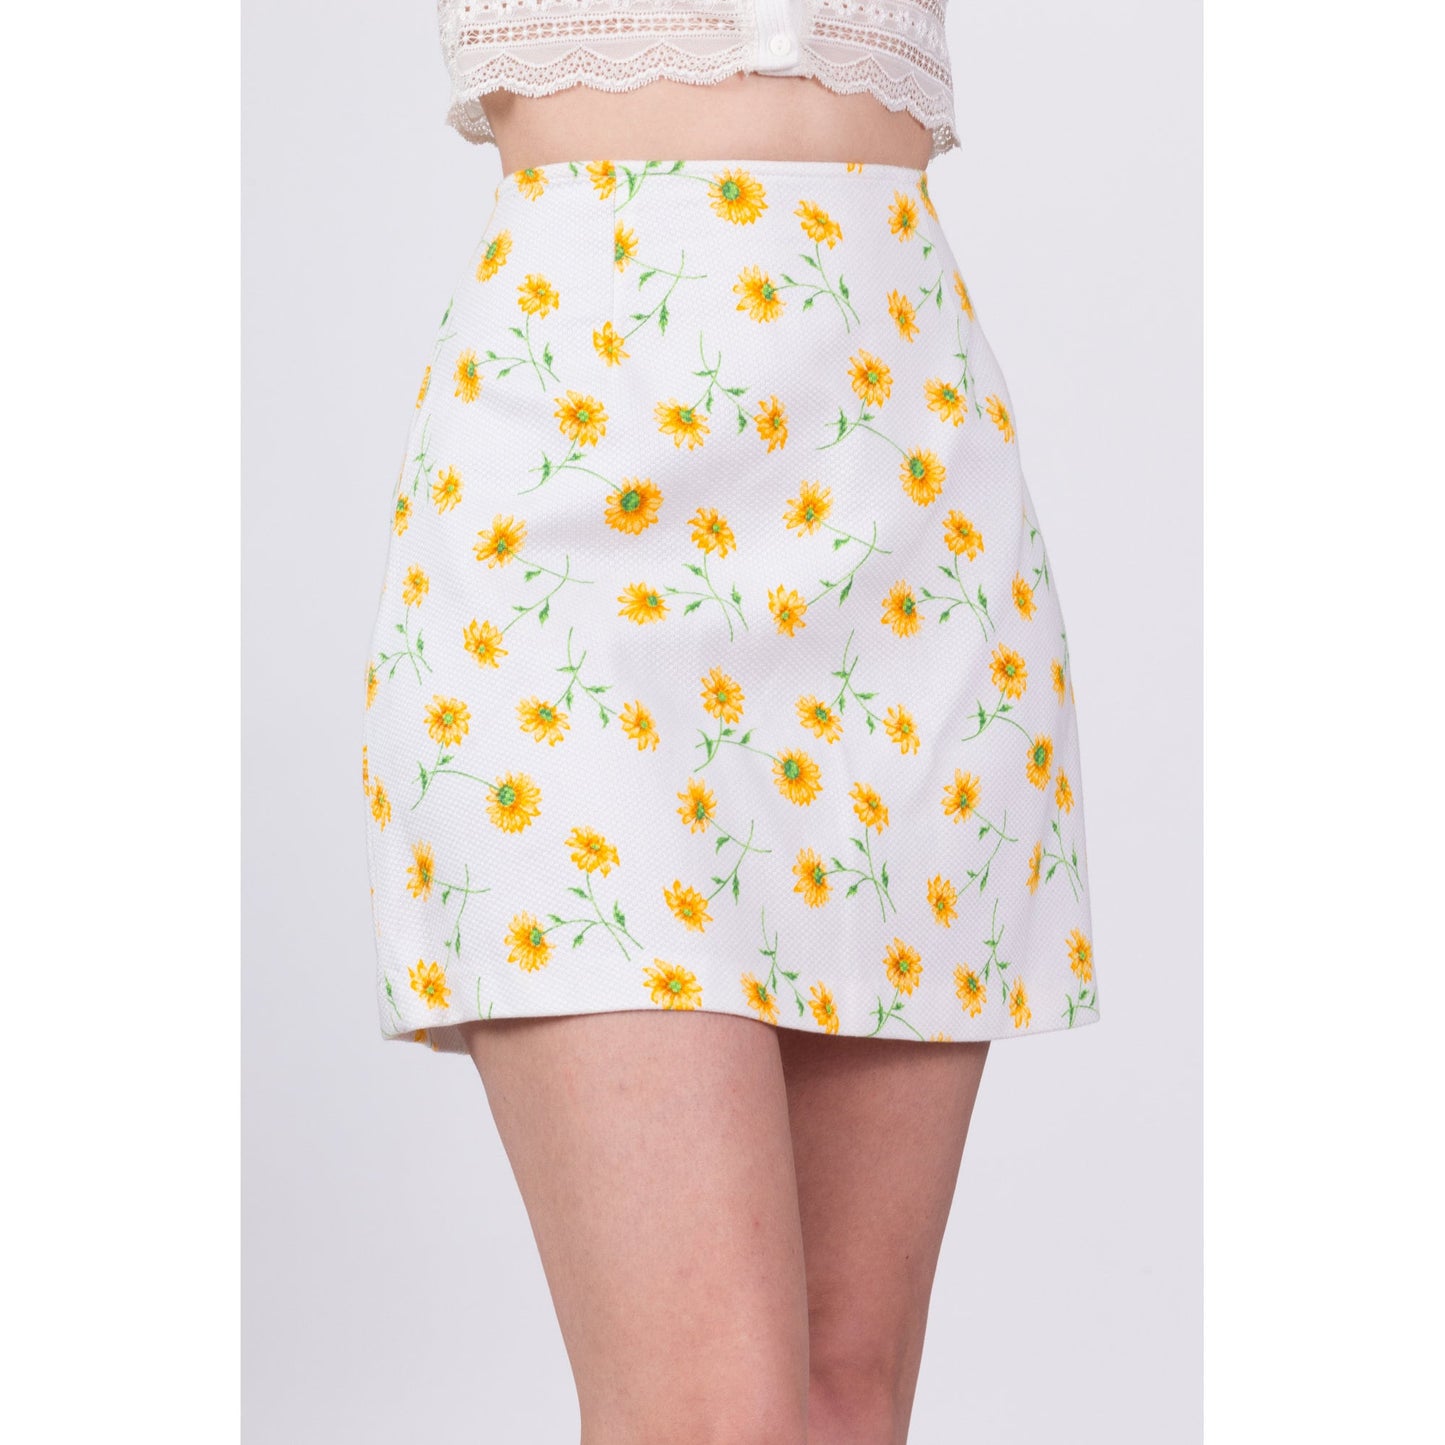 90s Express Floral Mini Skirt - Small, 26" 